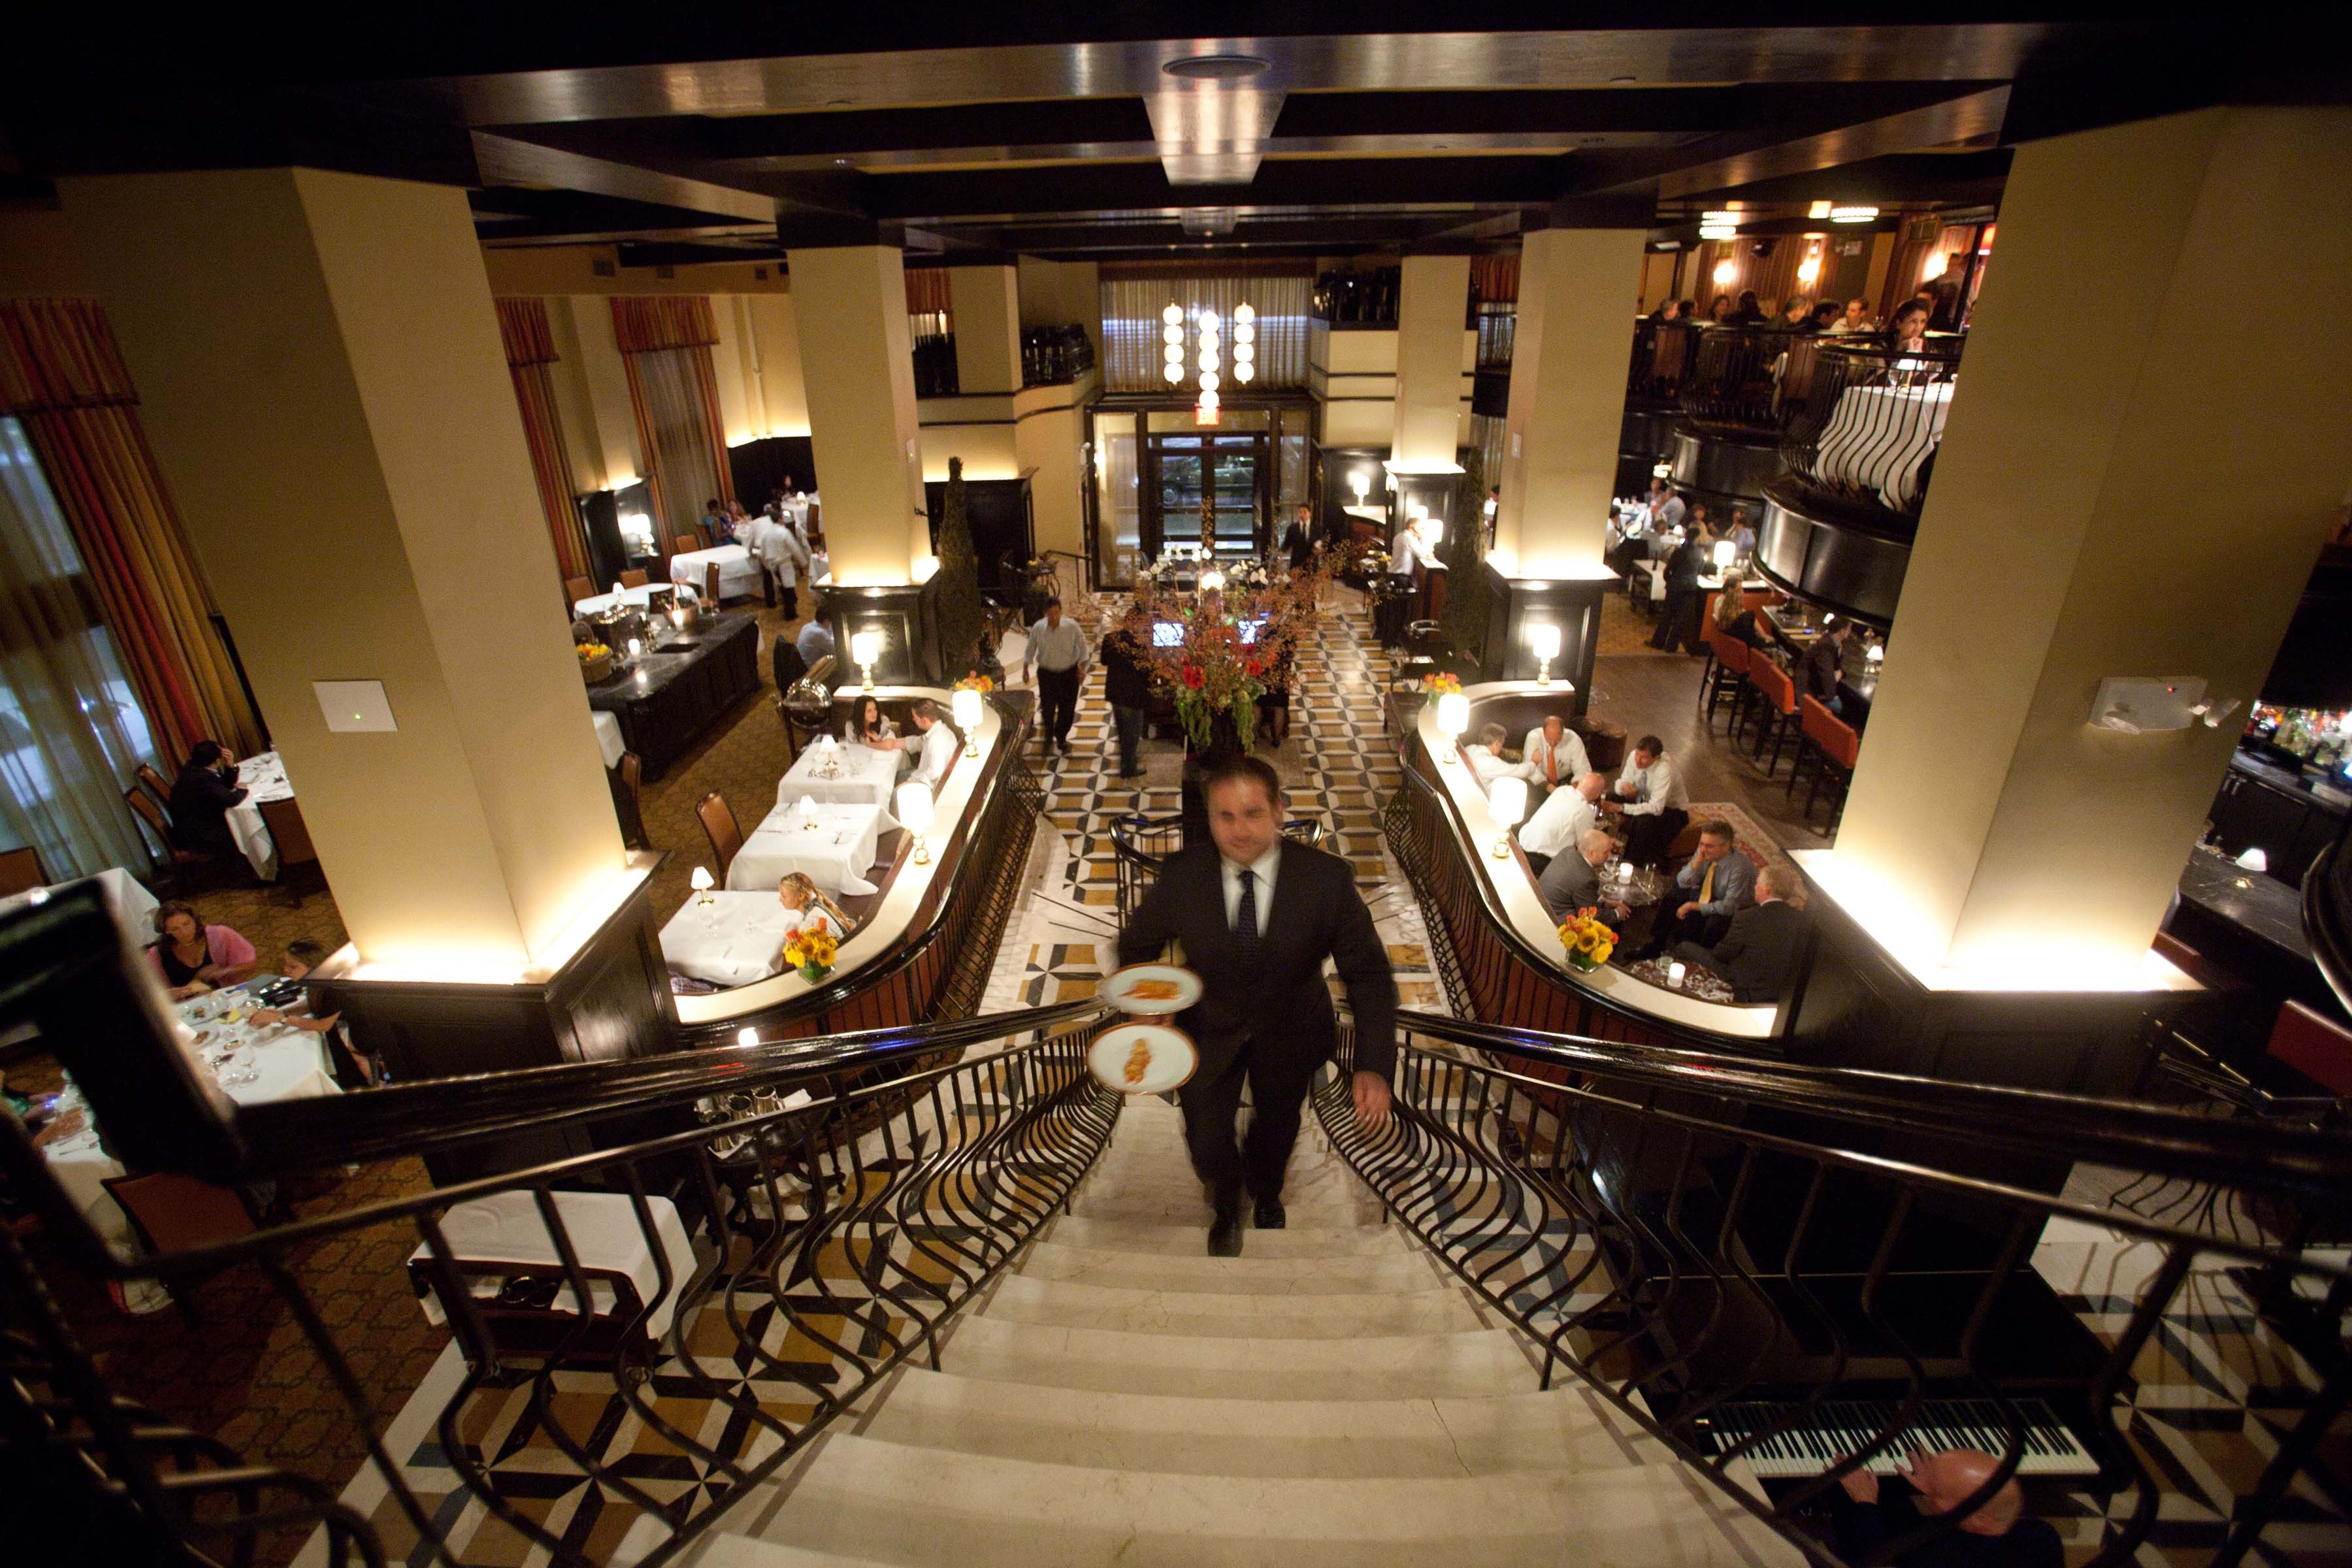 A waiter ascending the staircase to the upper level of Del Posto restaurant in New York.